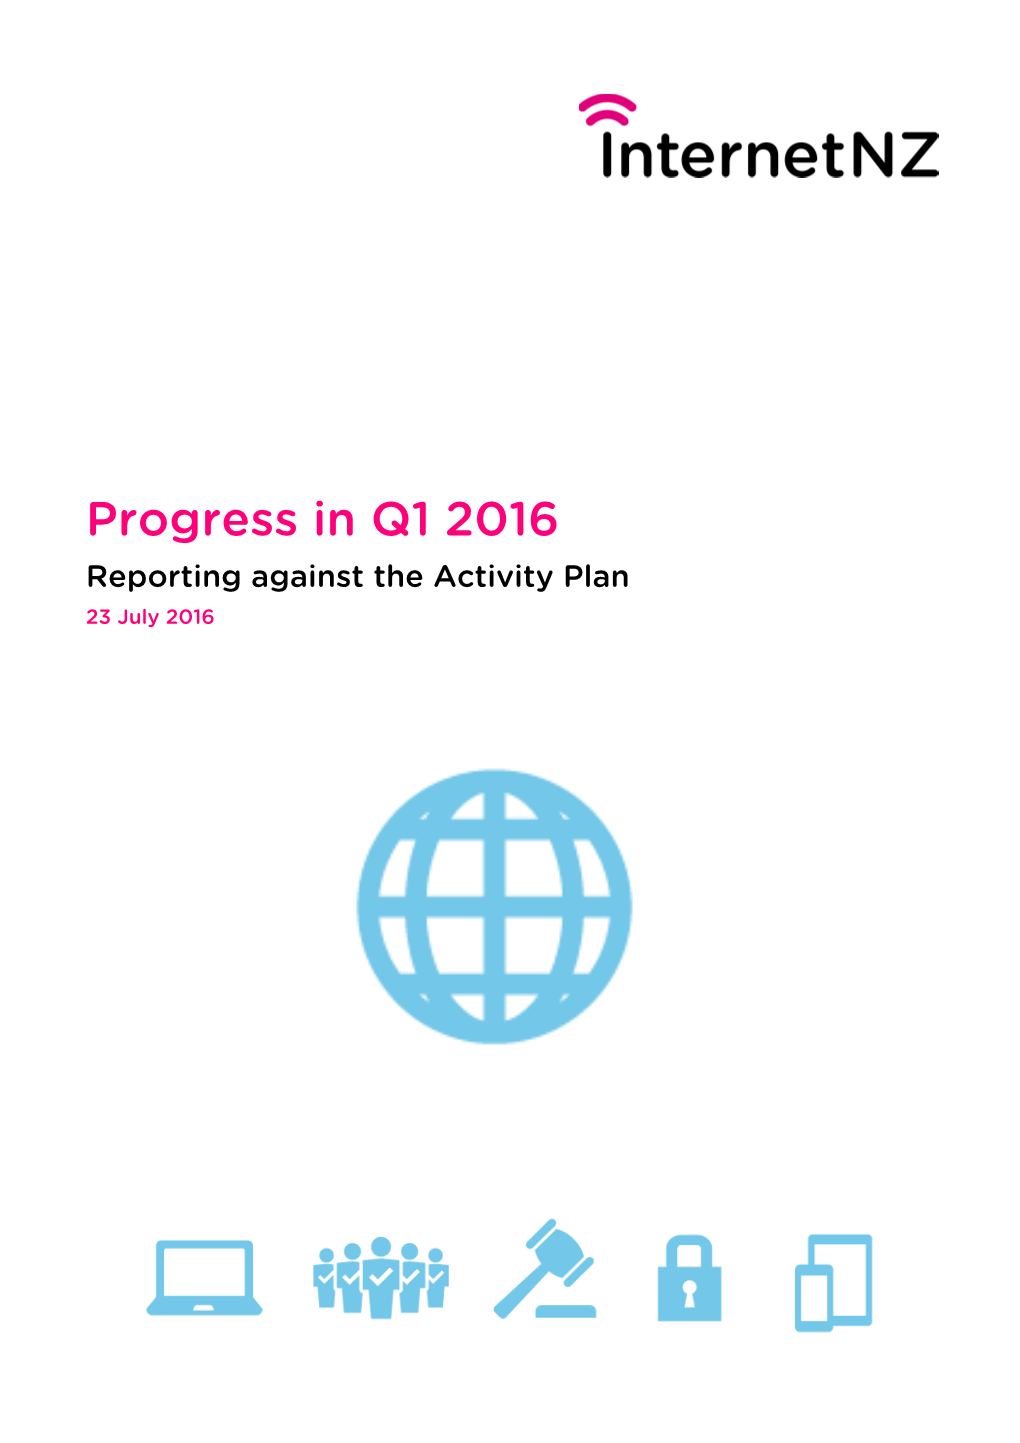 Progress in Q1 2016 Reporting Against the Activity Plan 23 July 2016